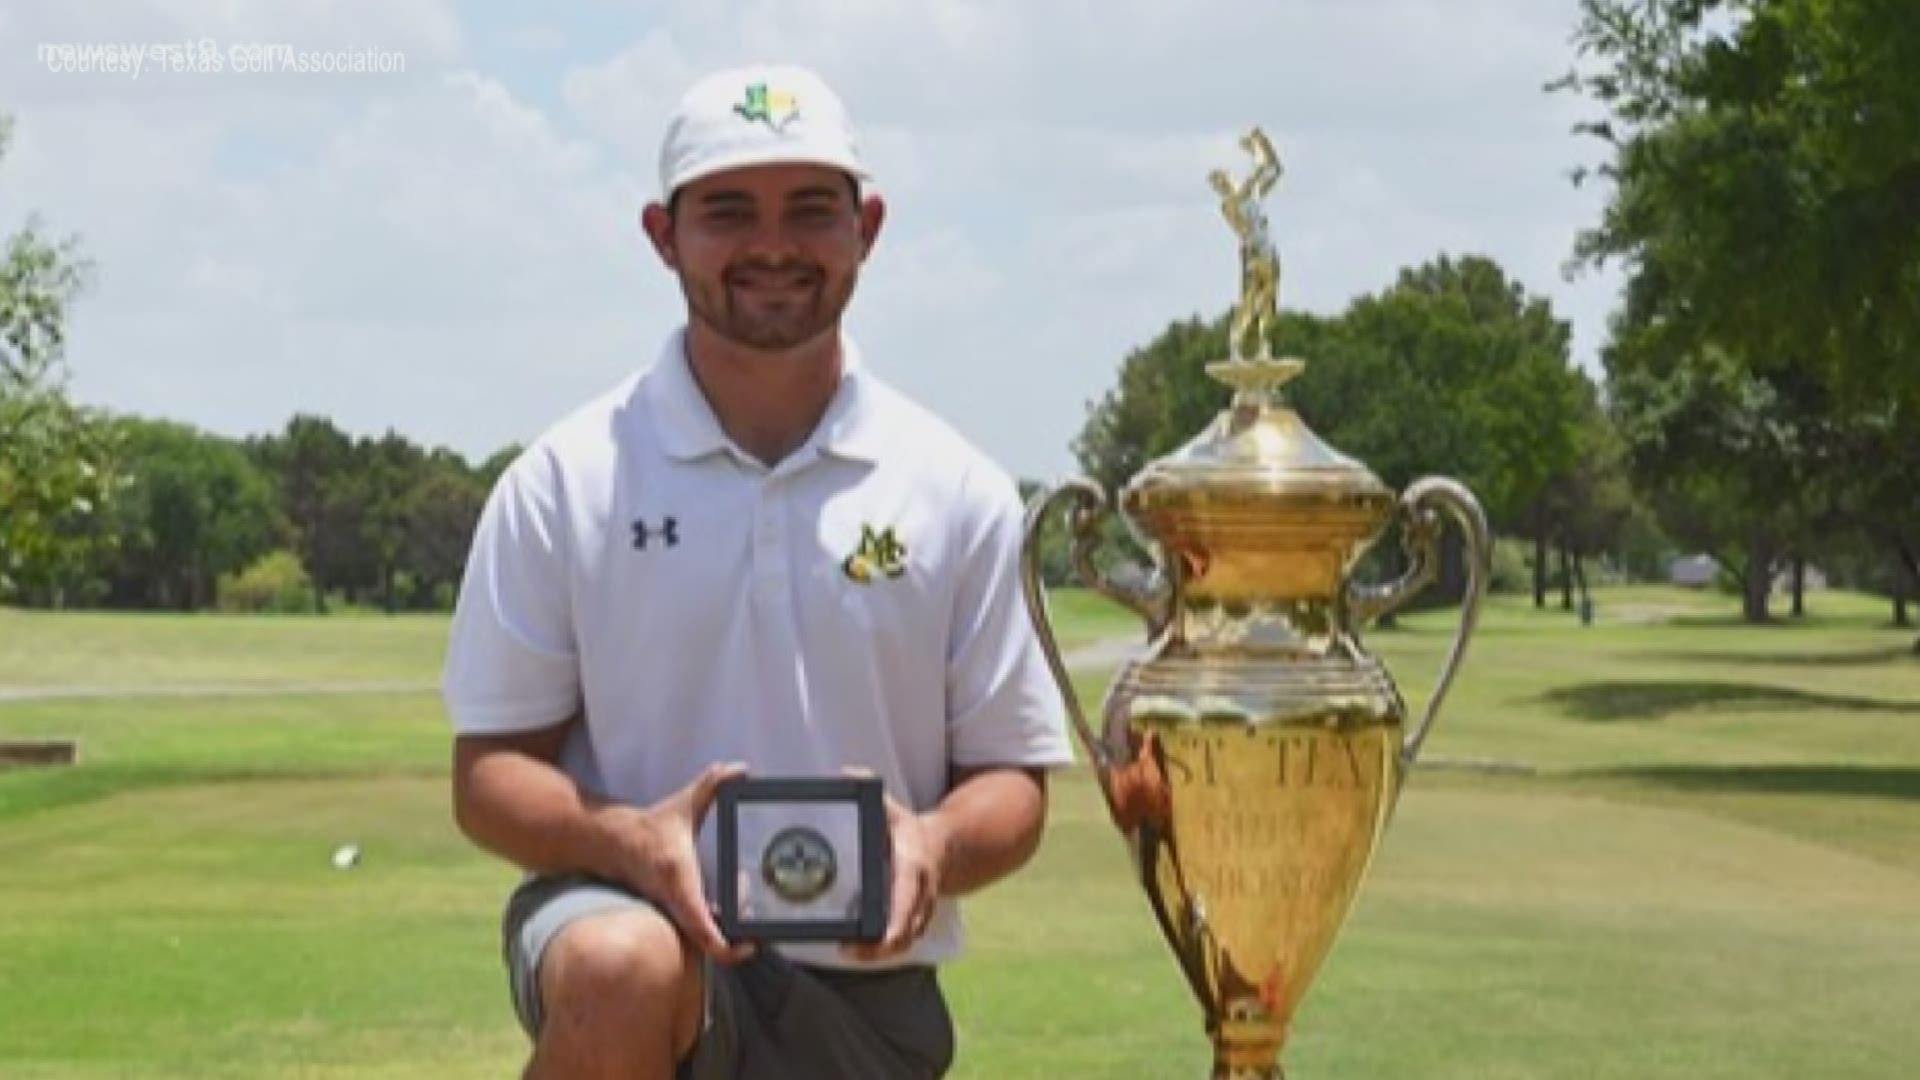 Midland College sophomore, JT Pittman, spoke about the importance of summer tournaments now that fall sports are pushed to spring.